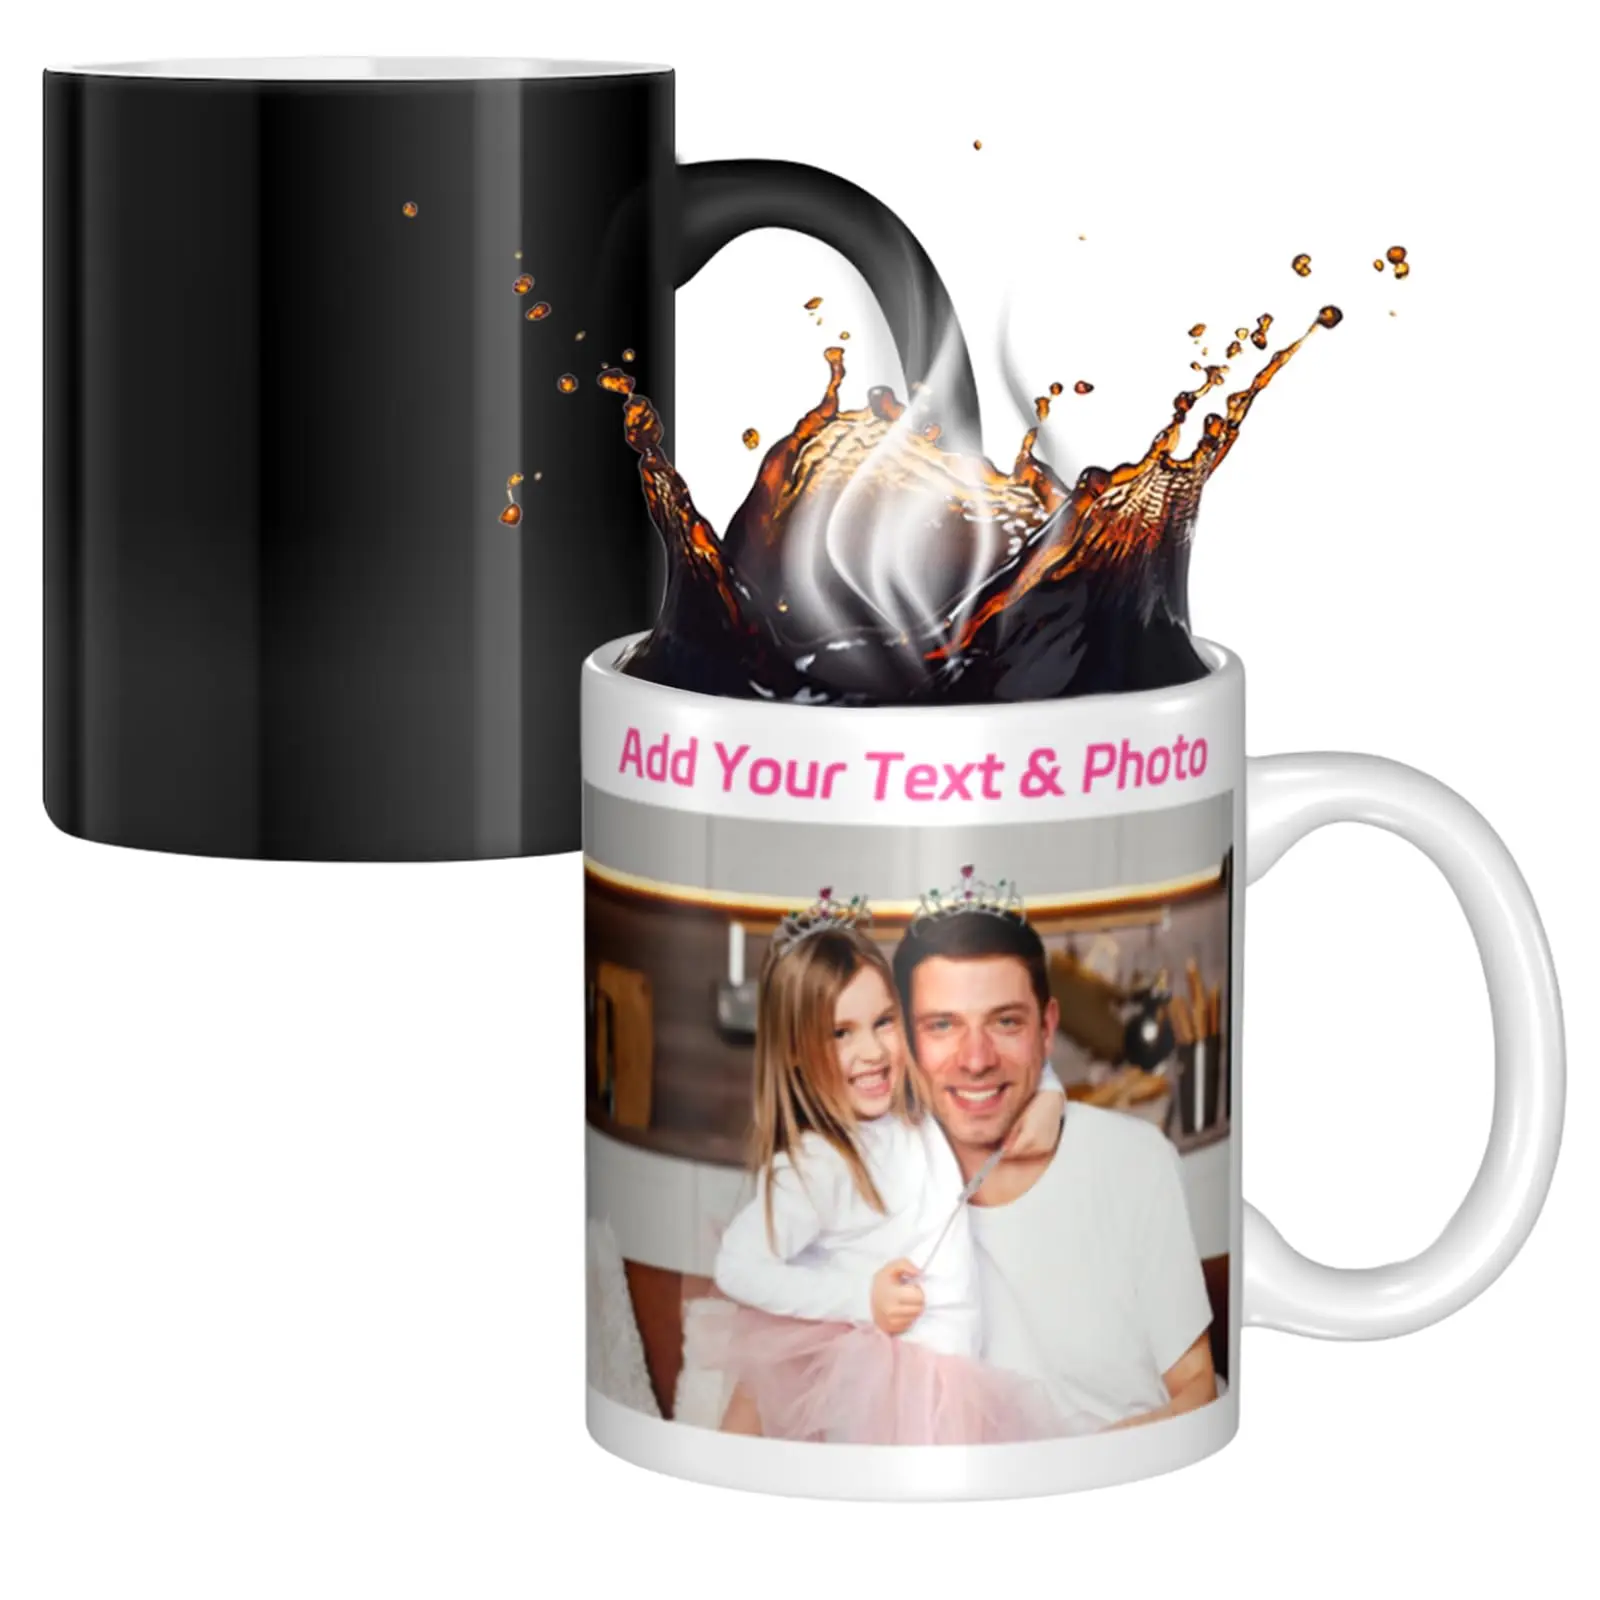 colour changing cups 11oz black sublimation blank cup custom design magic color changing ceramic coffee mug